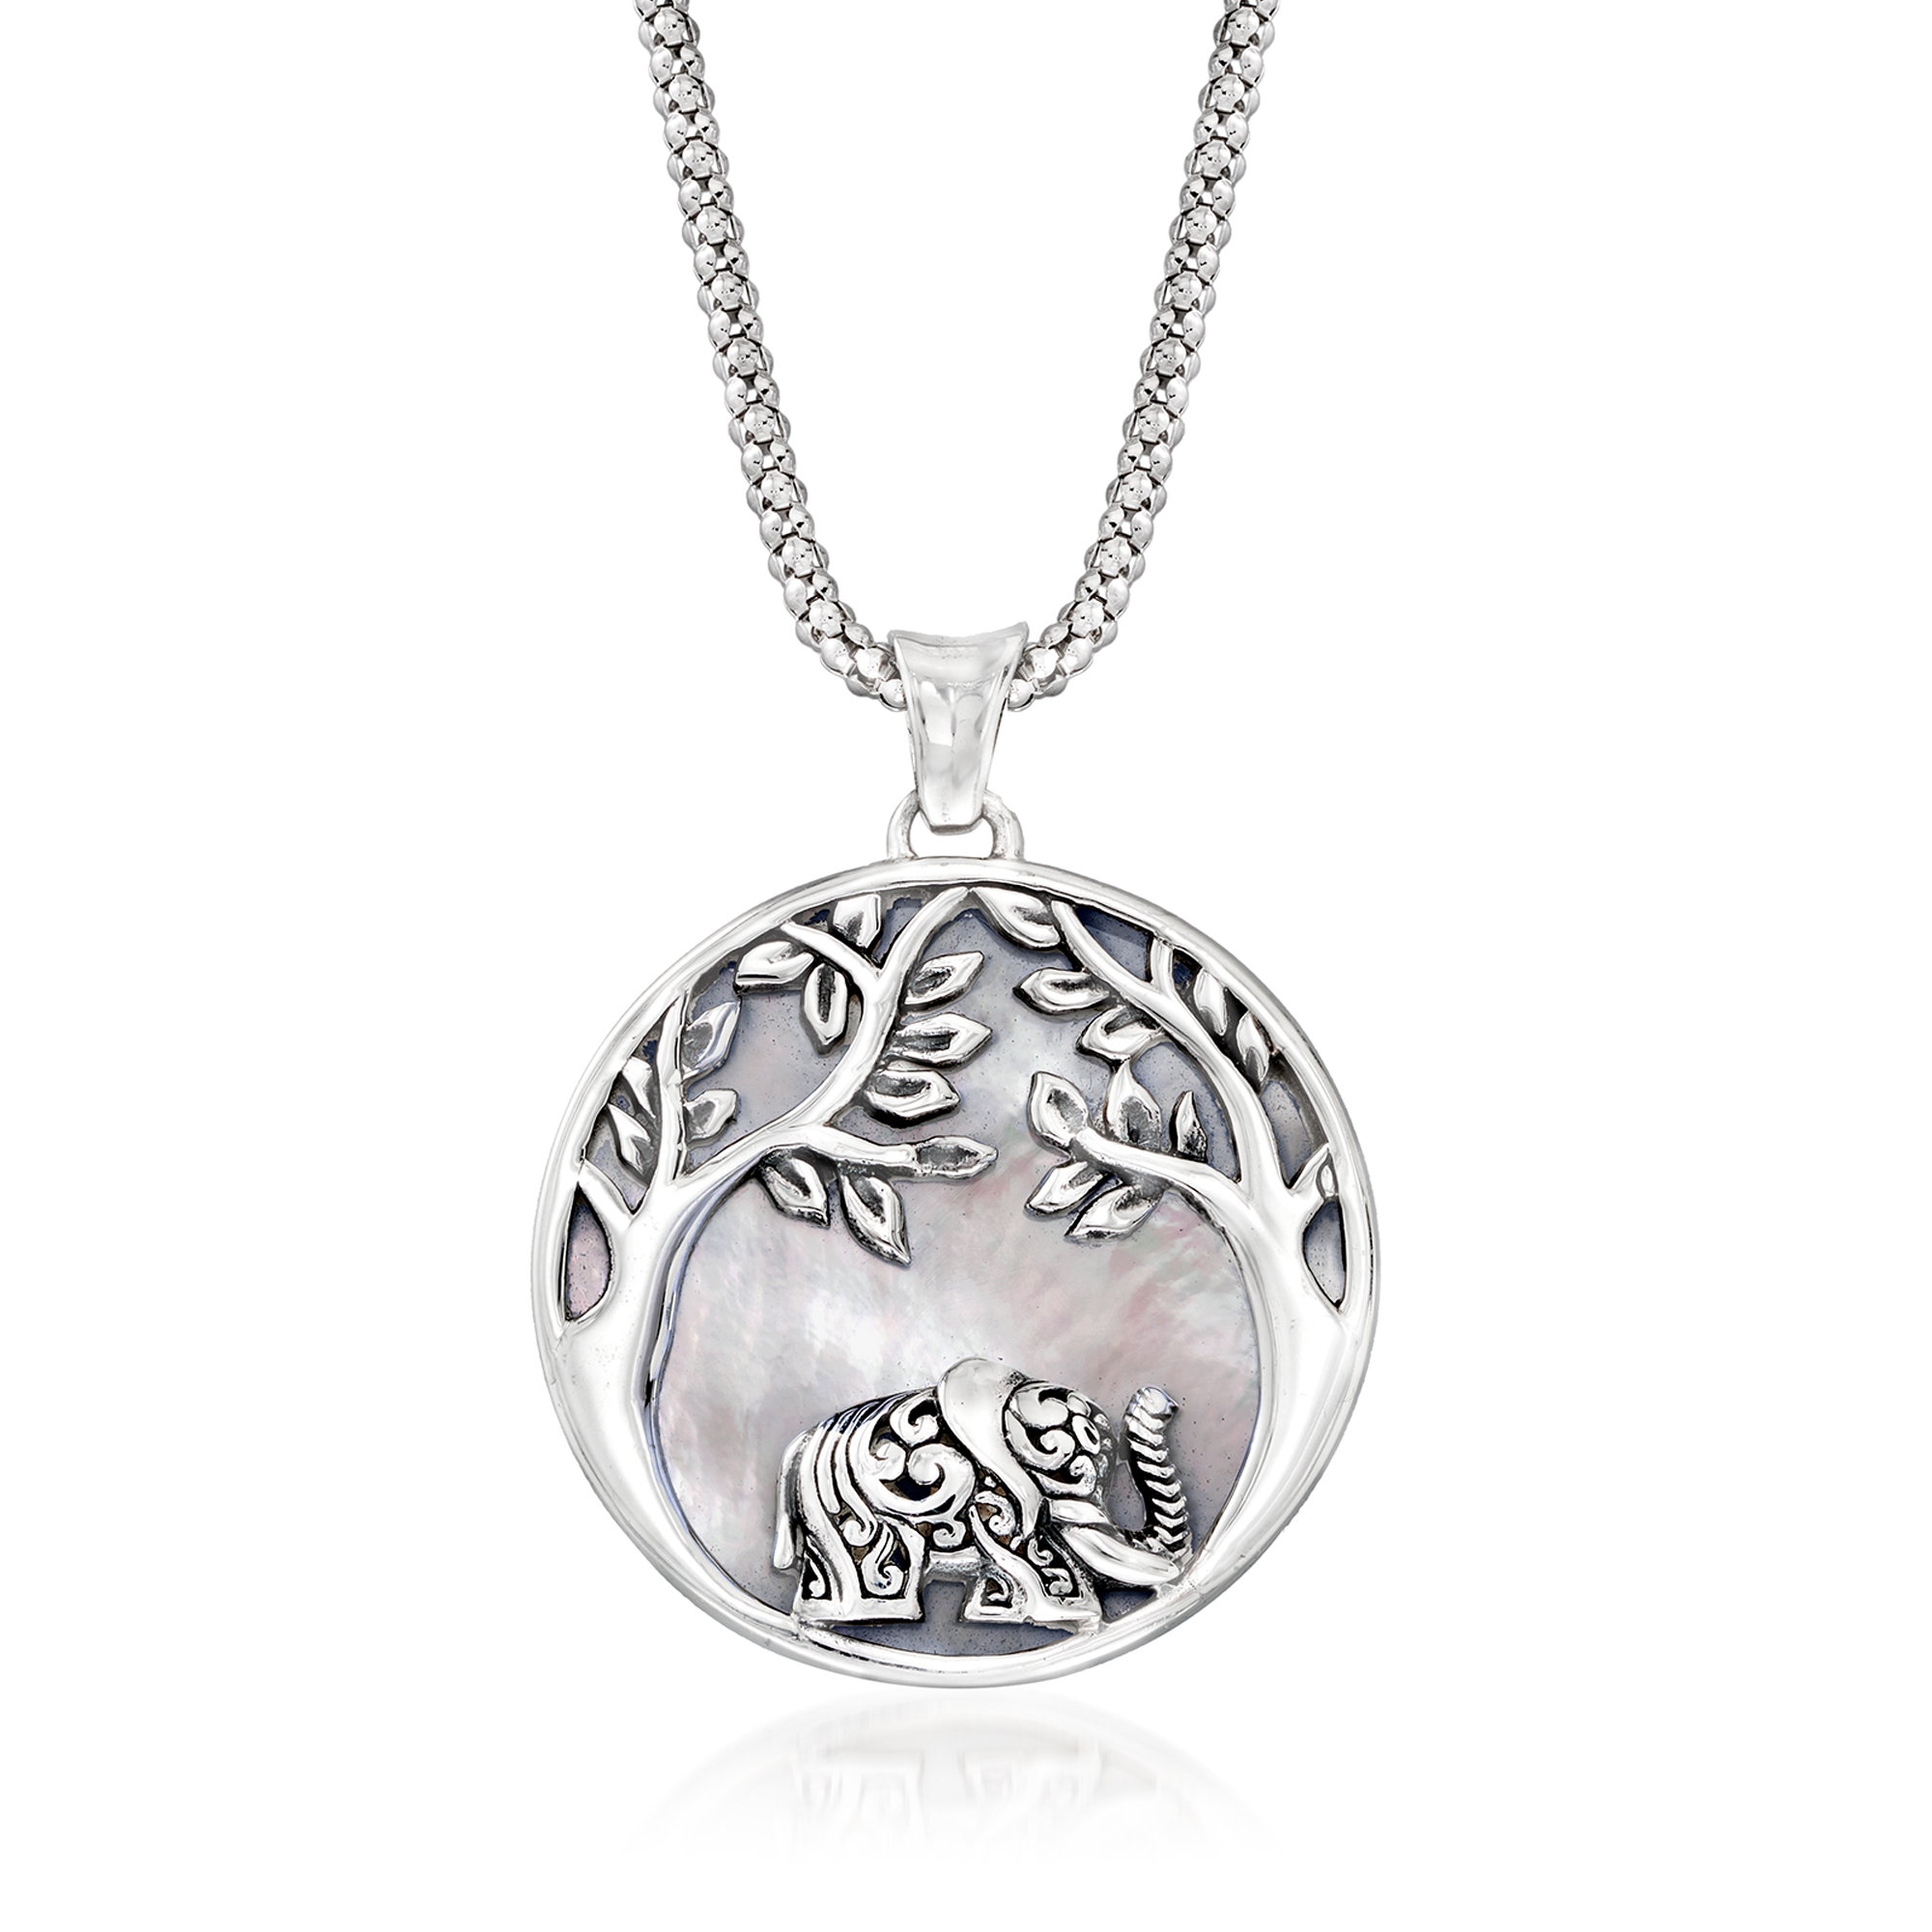 Mother-Of-Pearl Elephant-Scene Pendant Necklace in Sterling Silver. 18" |  Ross-Simons